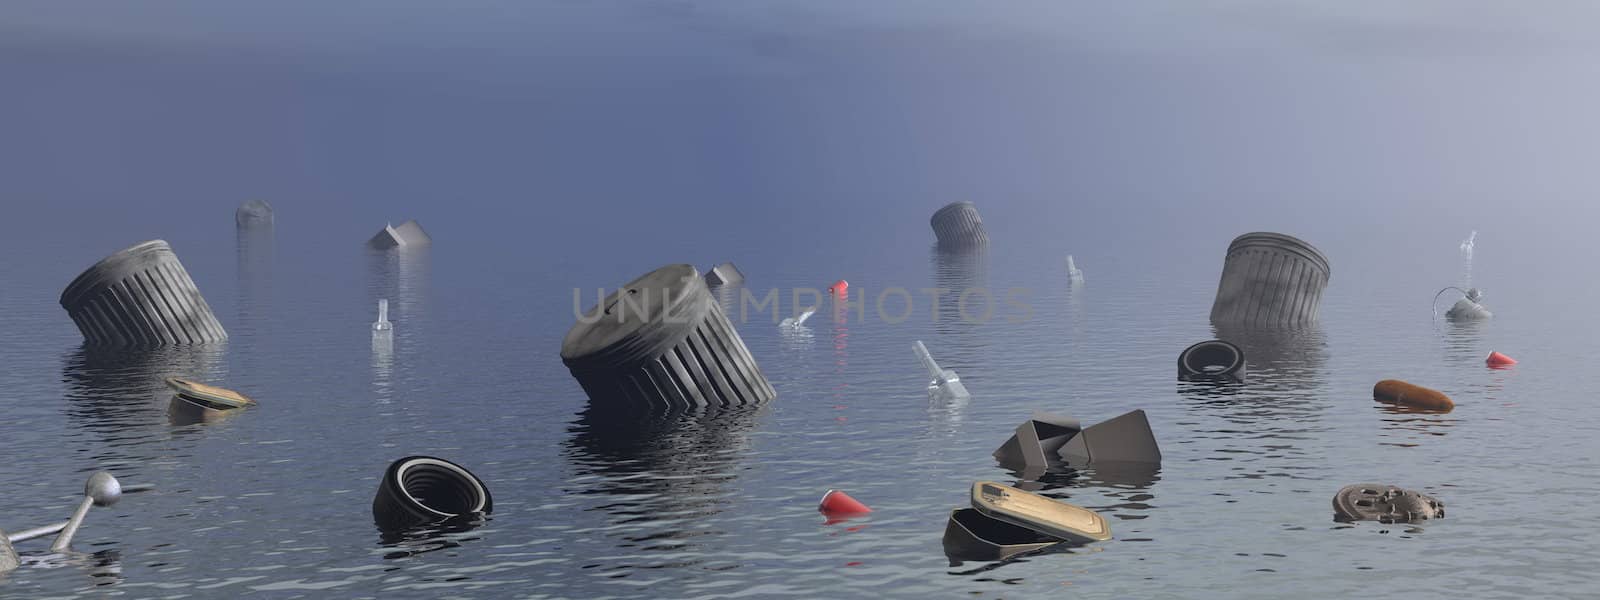 Many object polluting in the ocean - 3D render